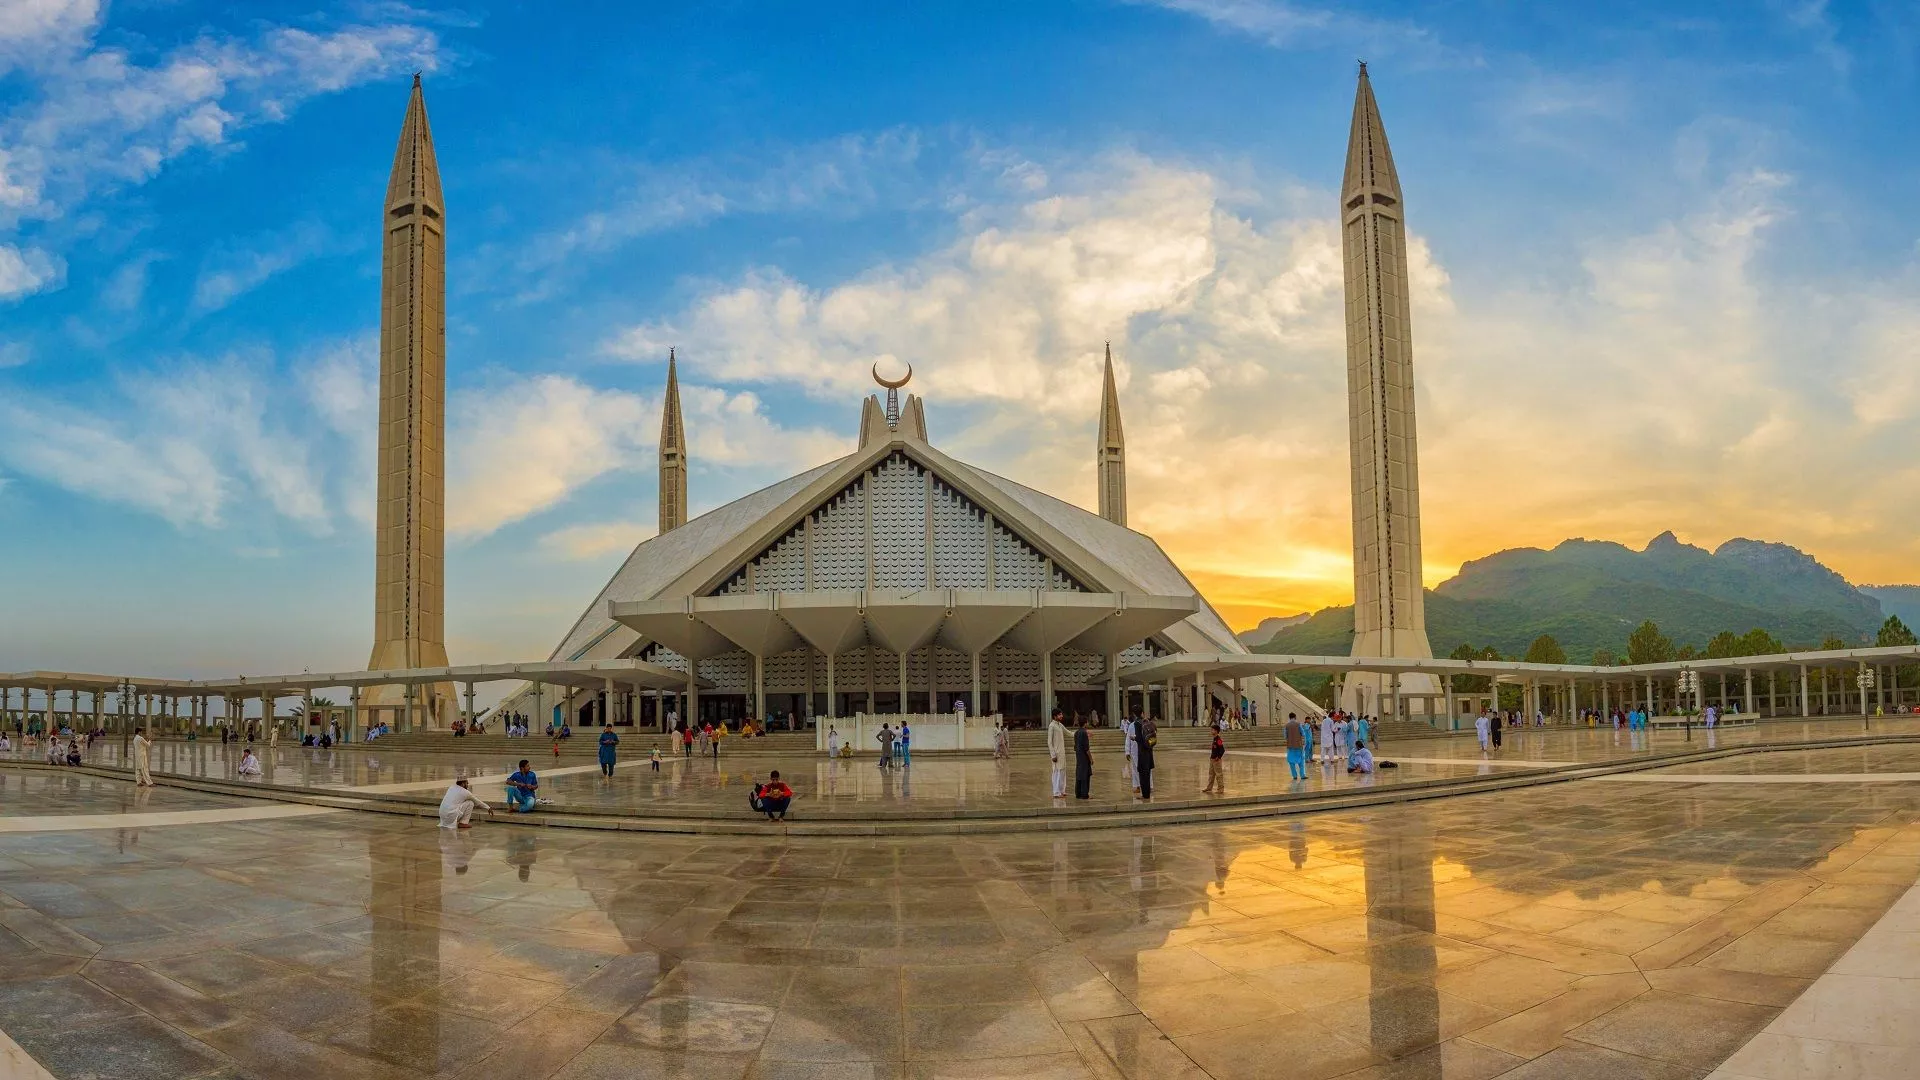 Faisal Mosque in Pakistan, South Asia | Architecture - Rated 5